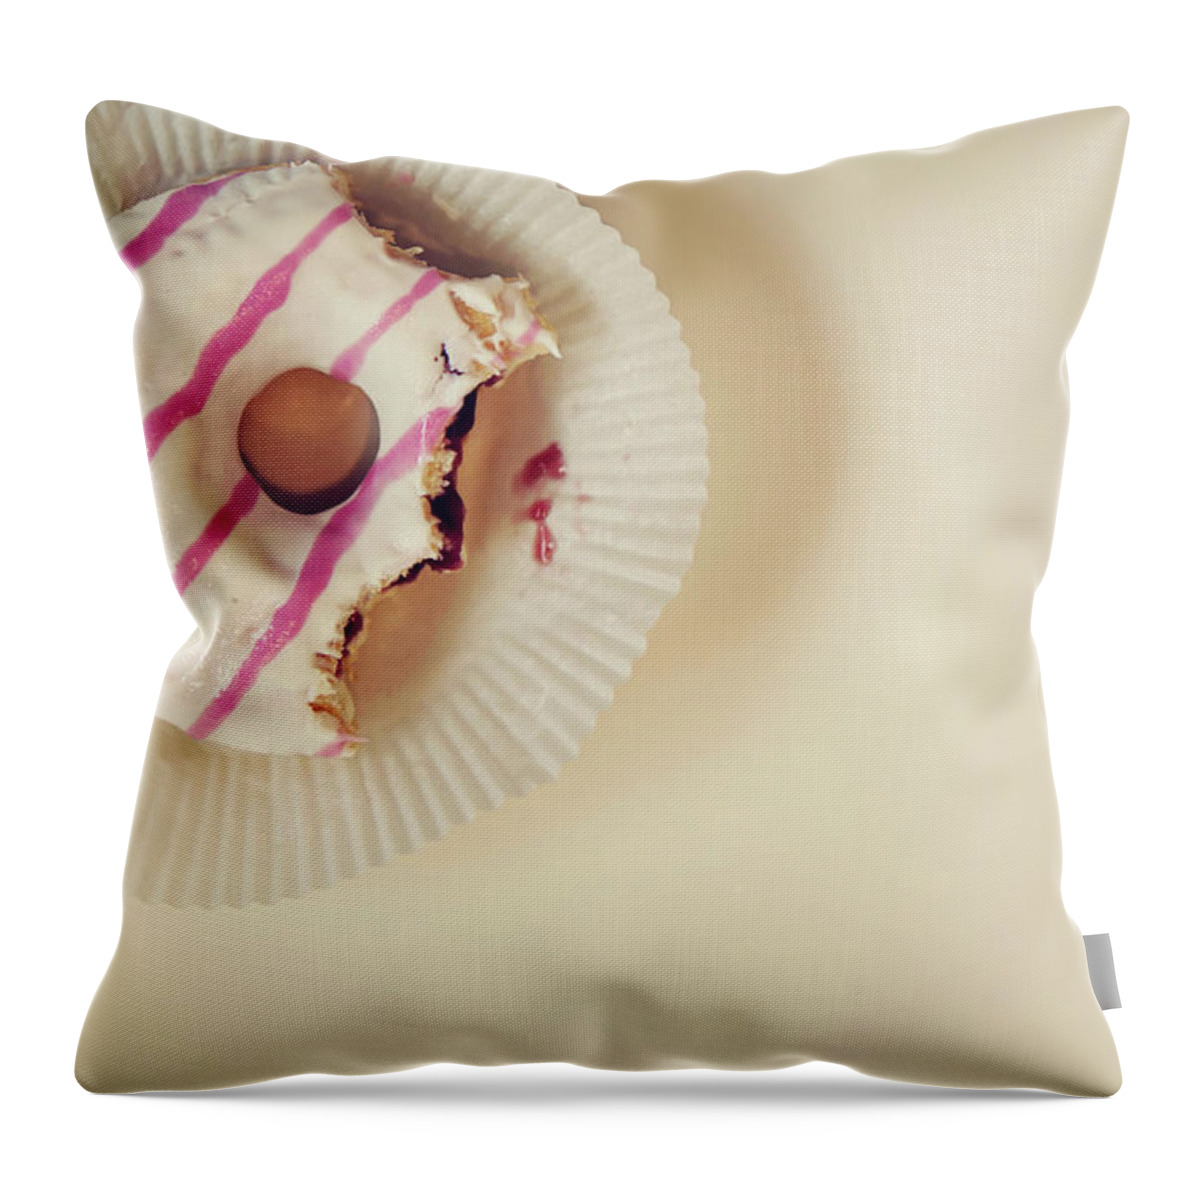 Unhealthy Eating Throw Pillow featuring the photograph Donut With Jelly by Kelly Sillaste